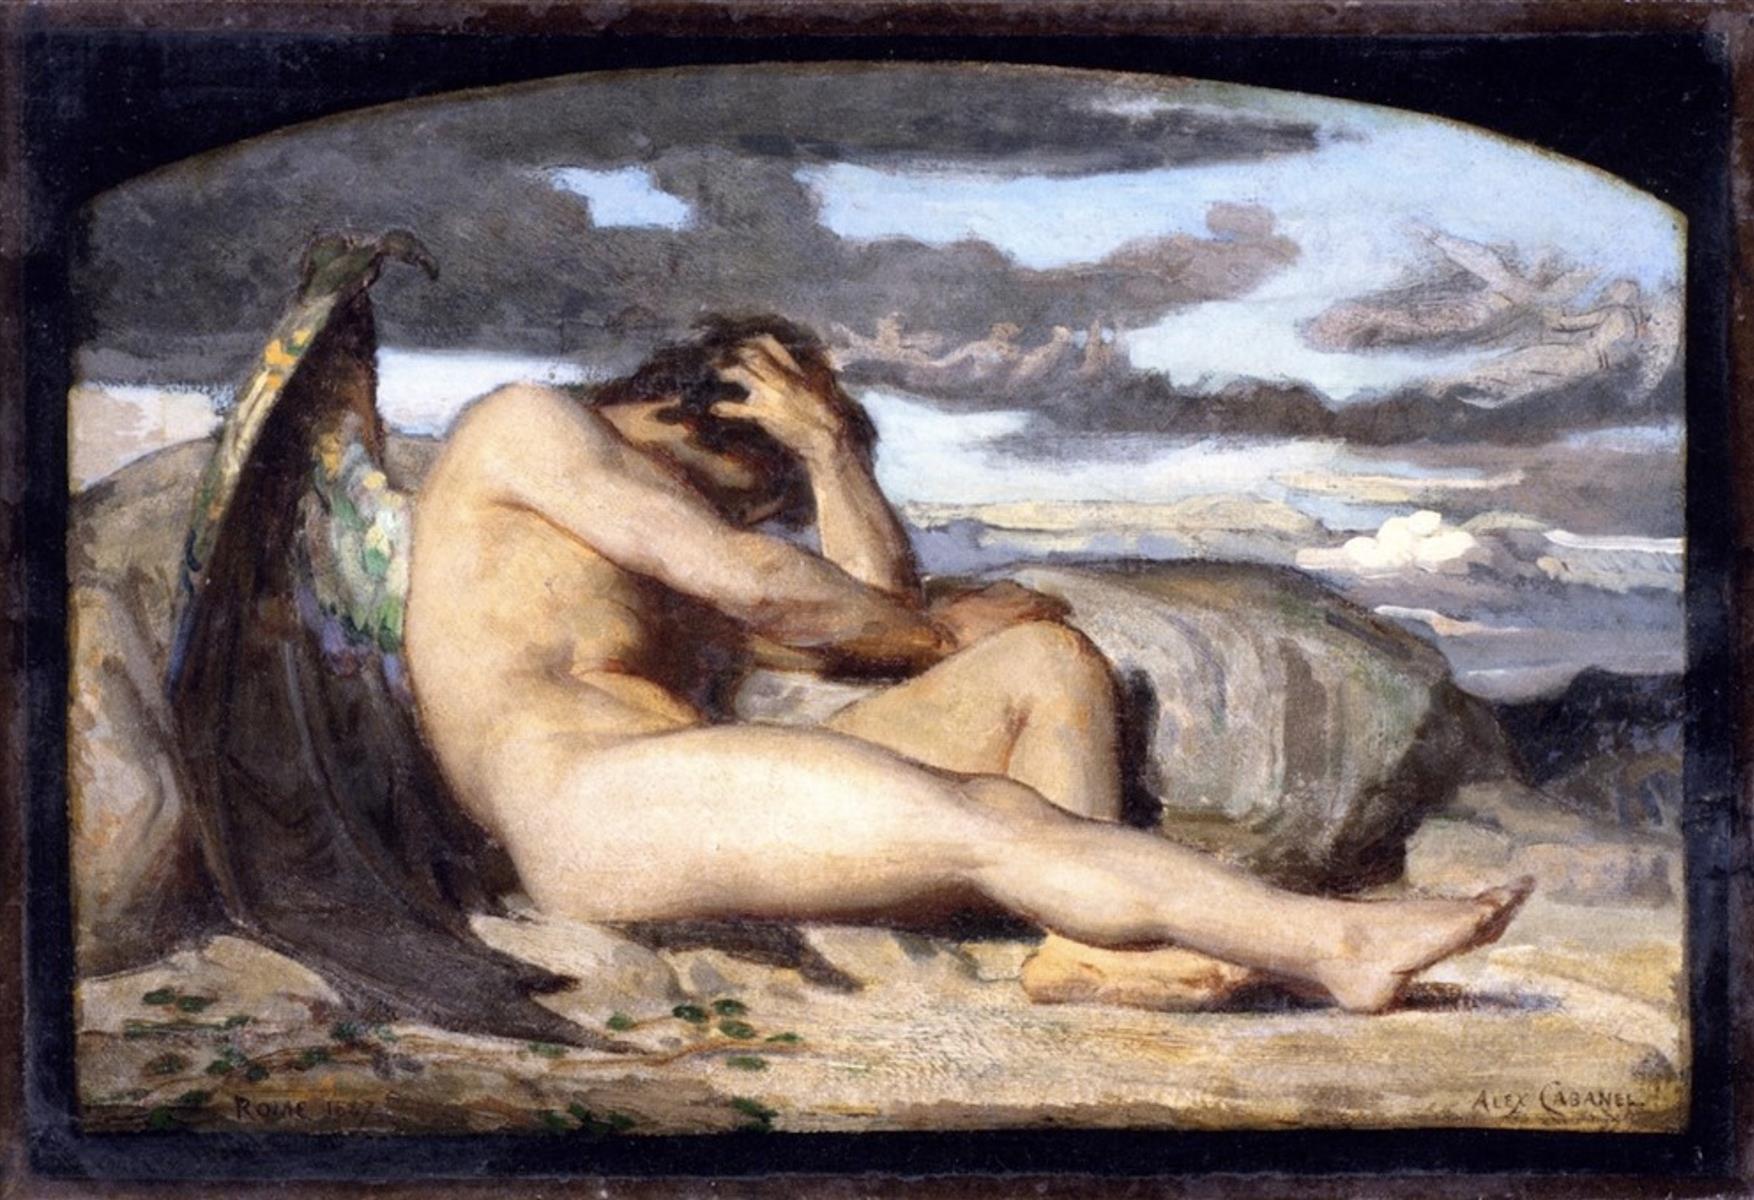 An oil painting of a nude and muscular man with curly hair and wings, lying on his side on a rock in a natural landscape.